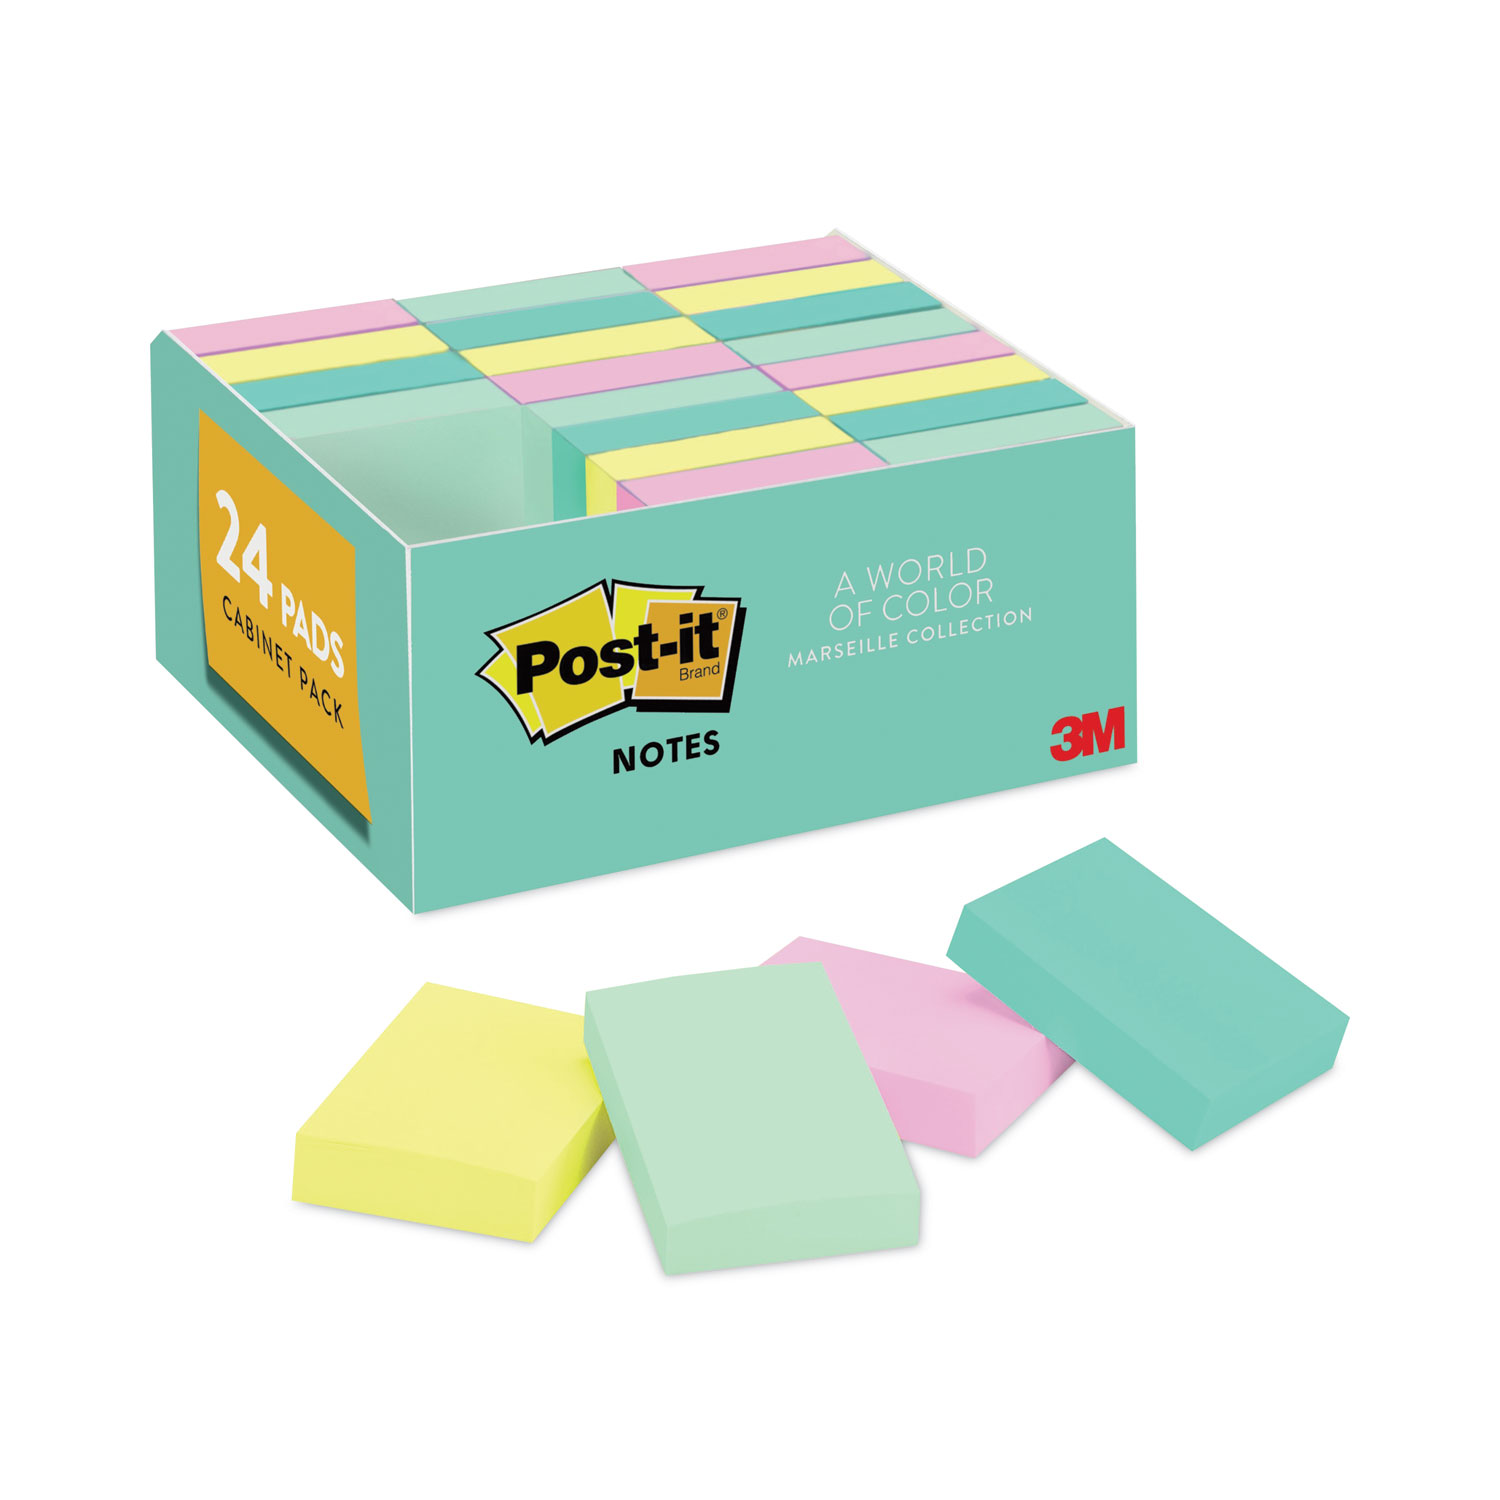 Post-it Notes Original Pads 24 Pack, 1.5in. x 2in, Marseille Collection